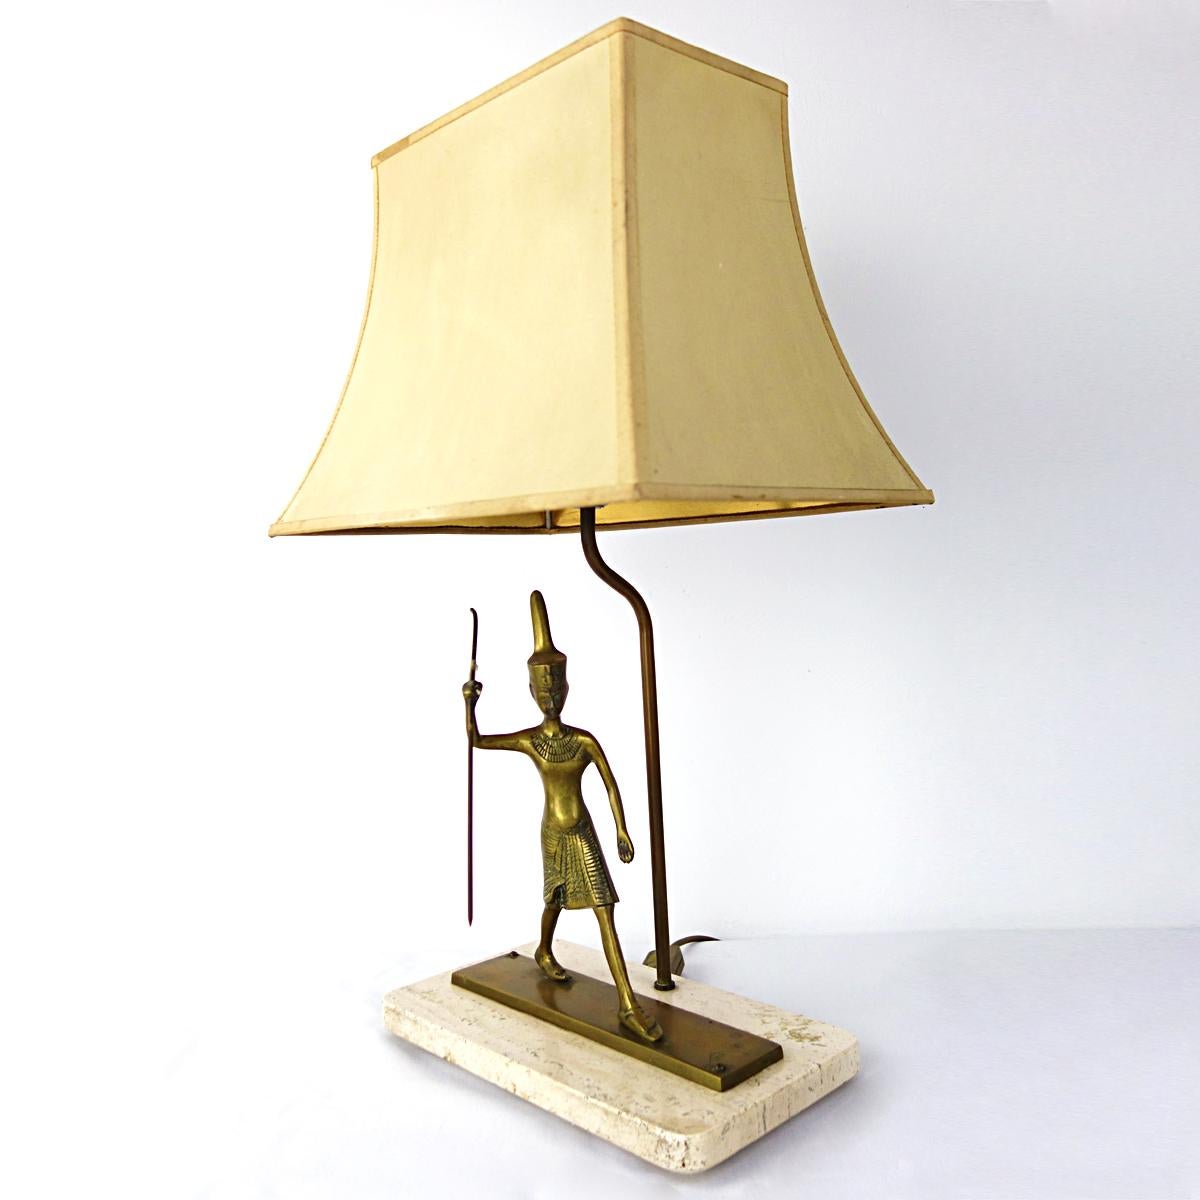 Very rare table lamp with a brass Egyptian warrior walking on a marble base. The shade, which is gold colored on the inside, provides for a warm light. A true personilty.